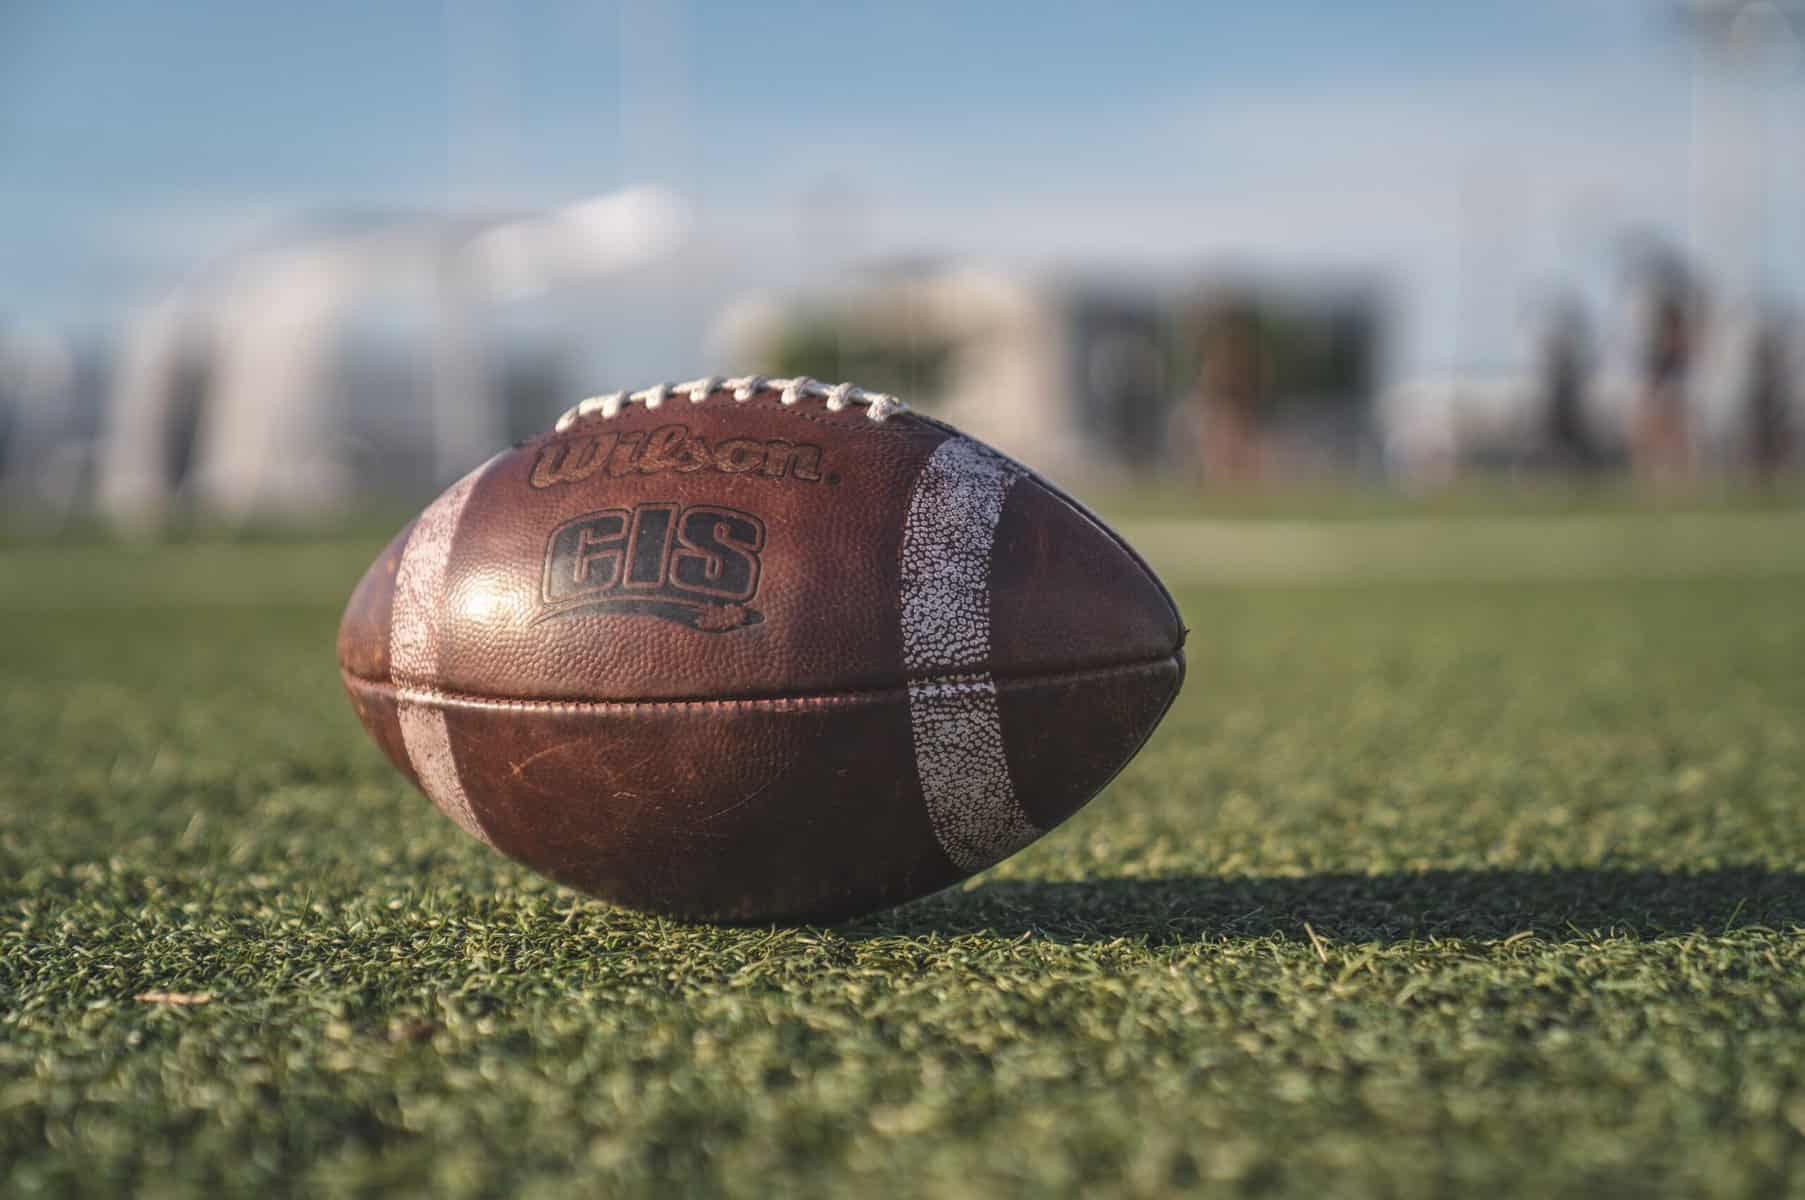 A worn Wilson brand football sits in daylight on an astroturf field and is photographed from close up with the background very blurry